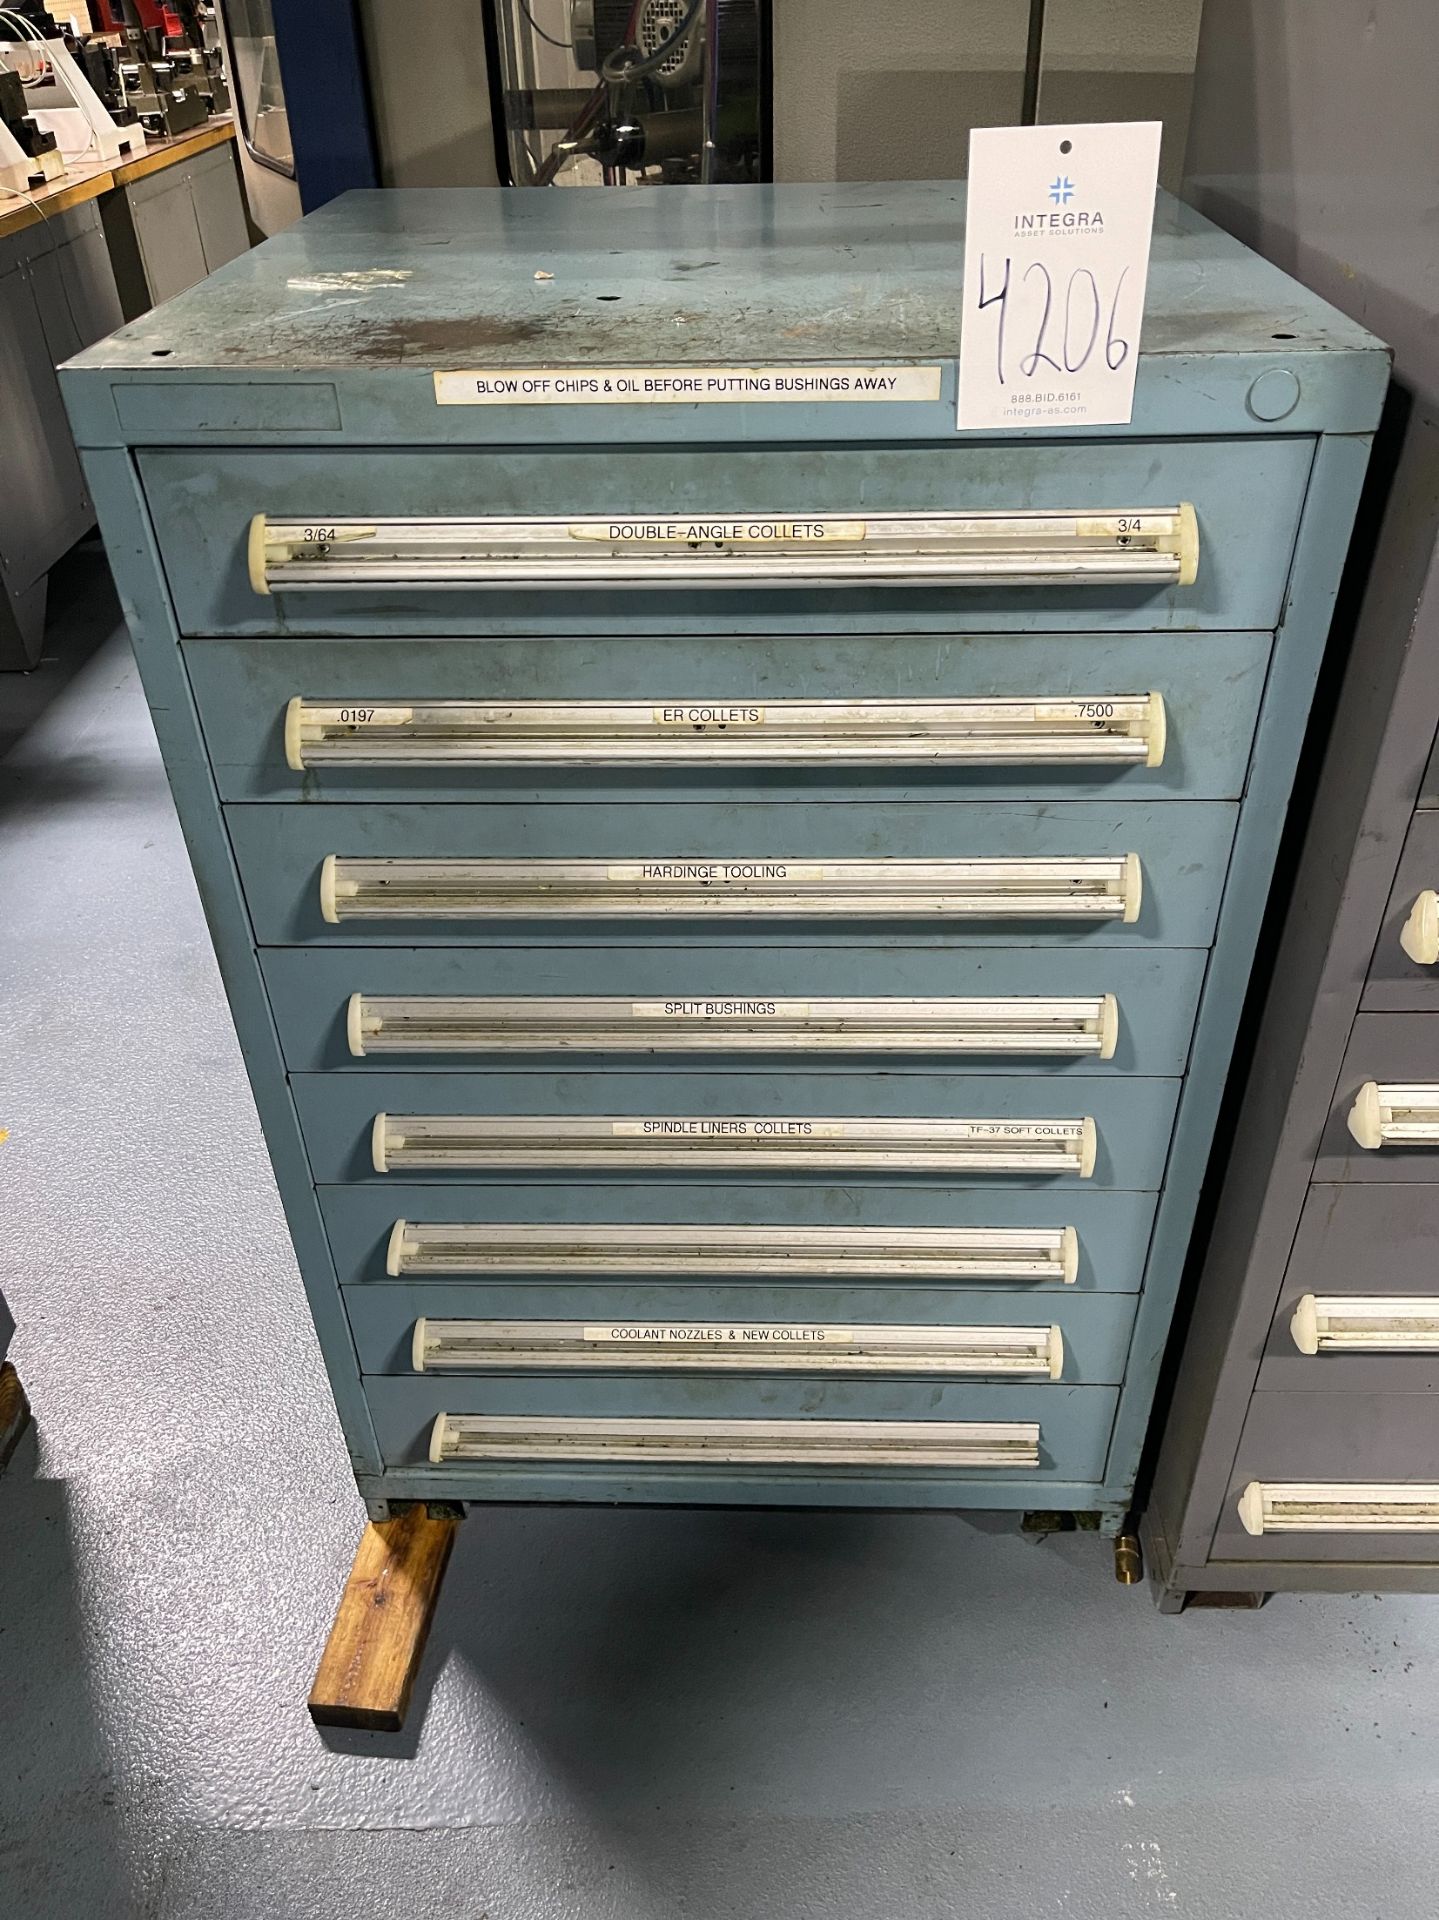 8-Drawer Tooling Cabinet